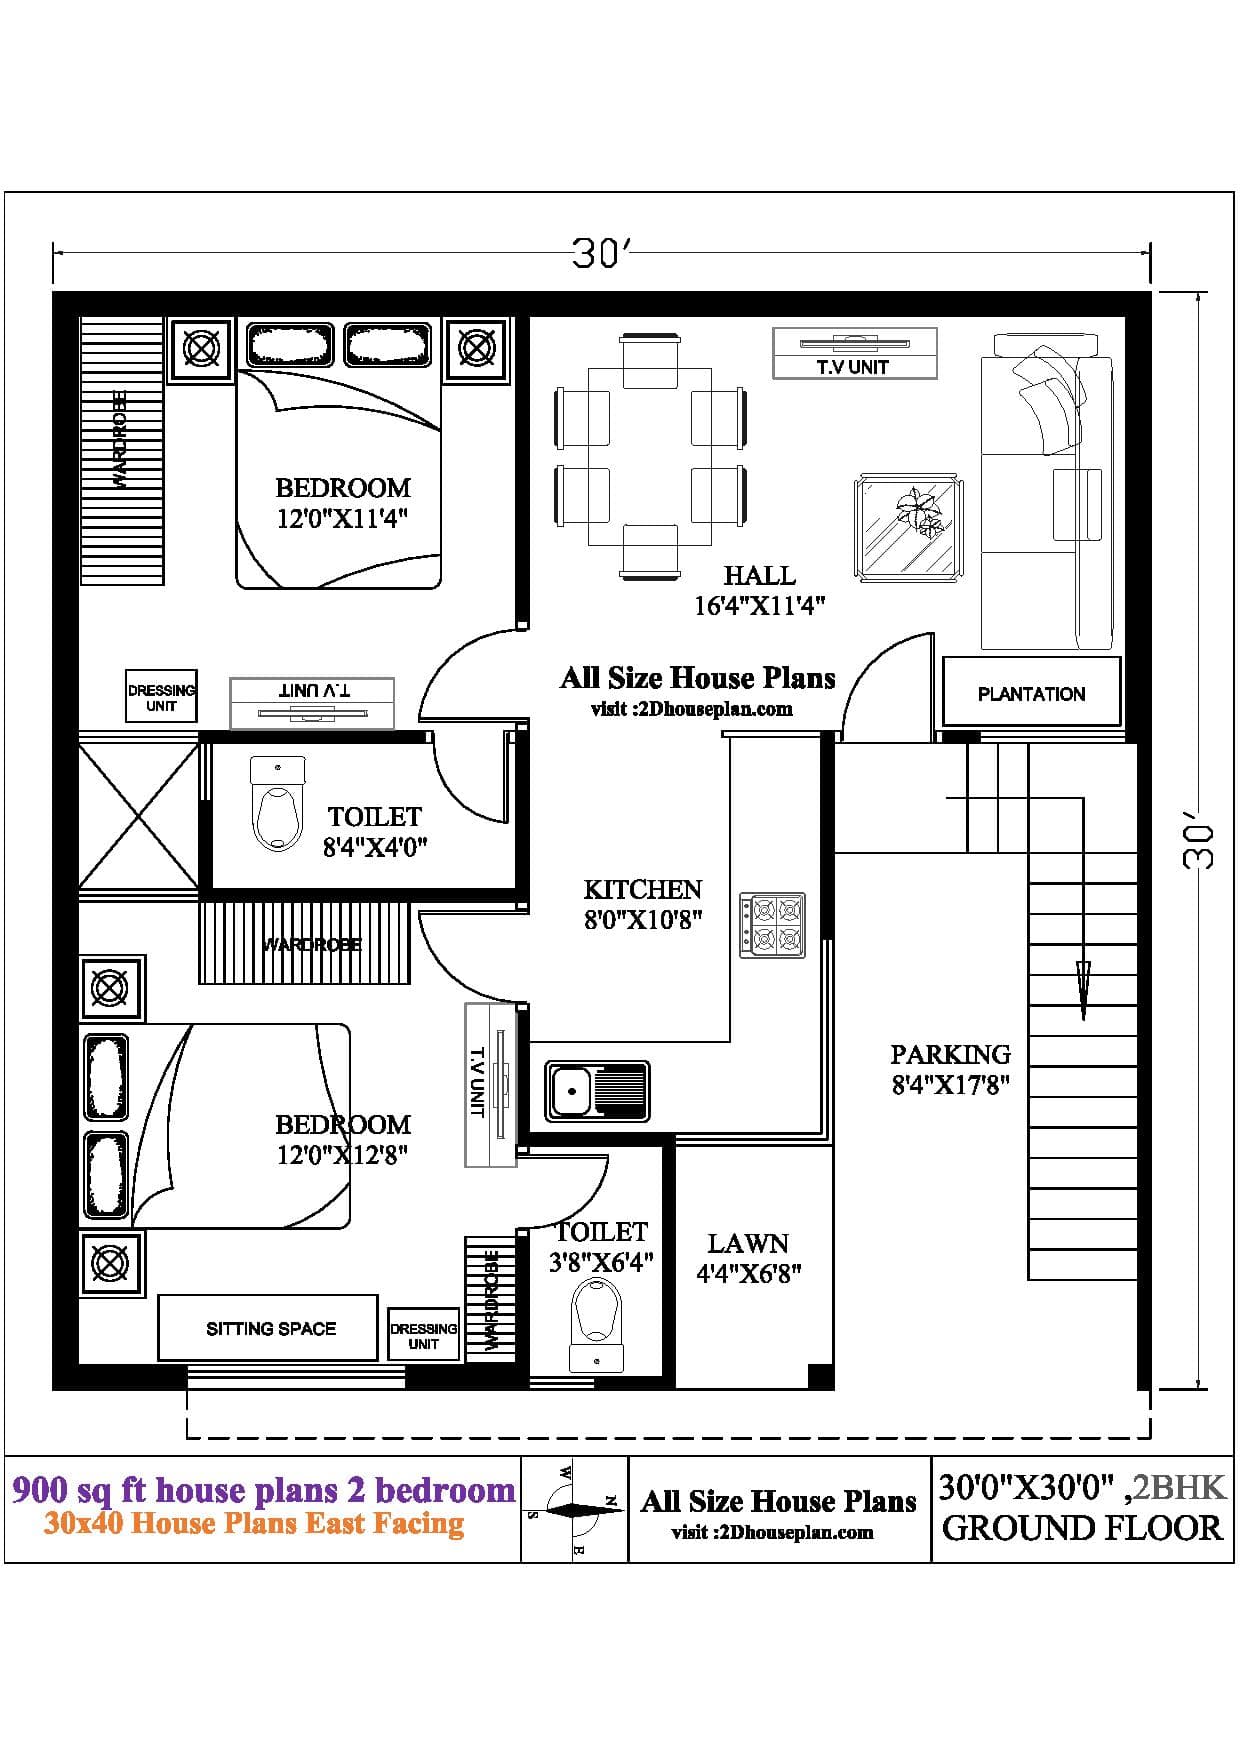 How Many Square Feet Is A 1 Bedroom House | www.resnooze.com